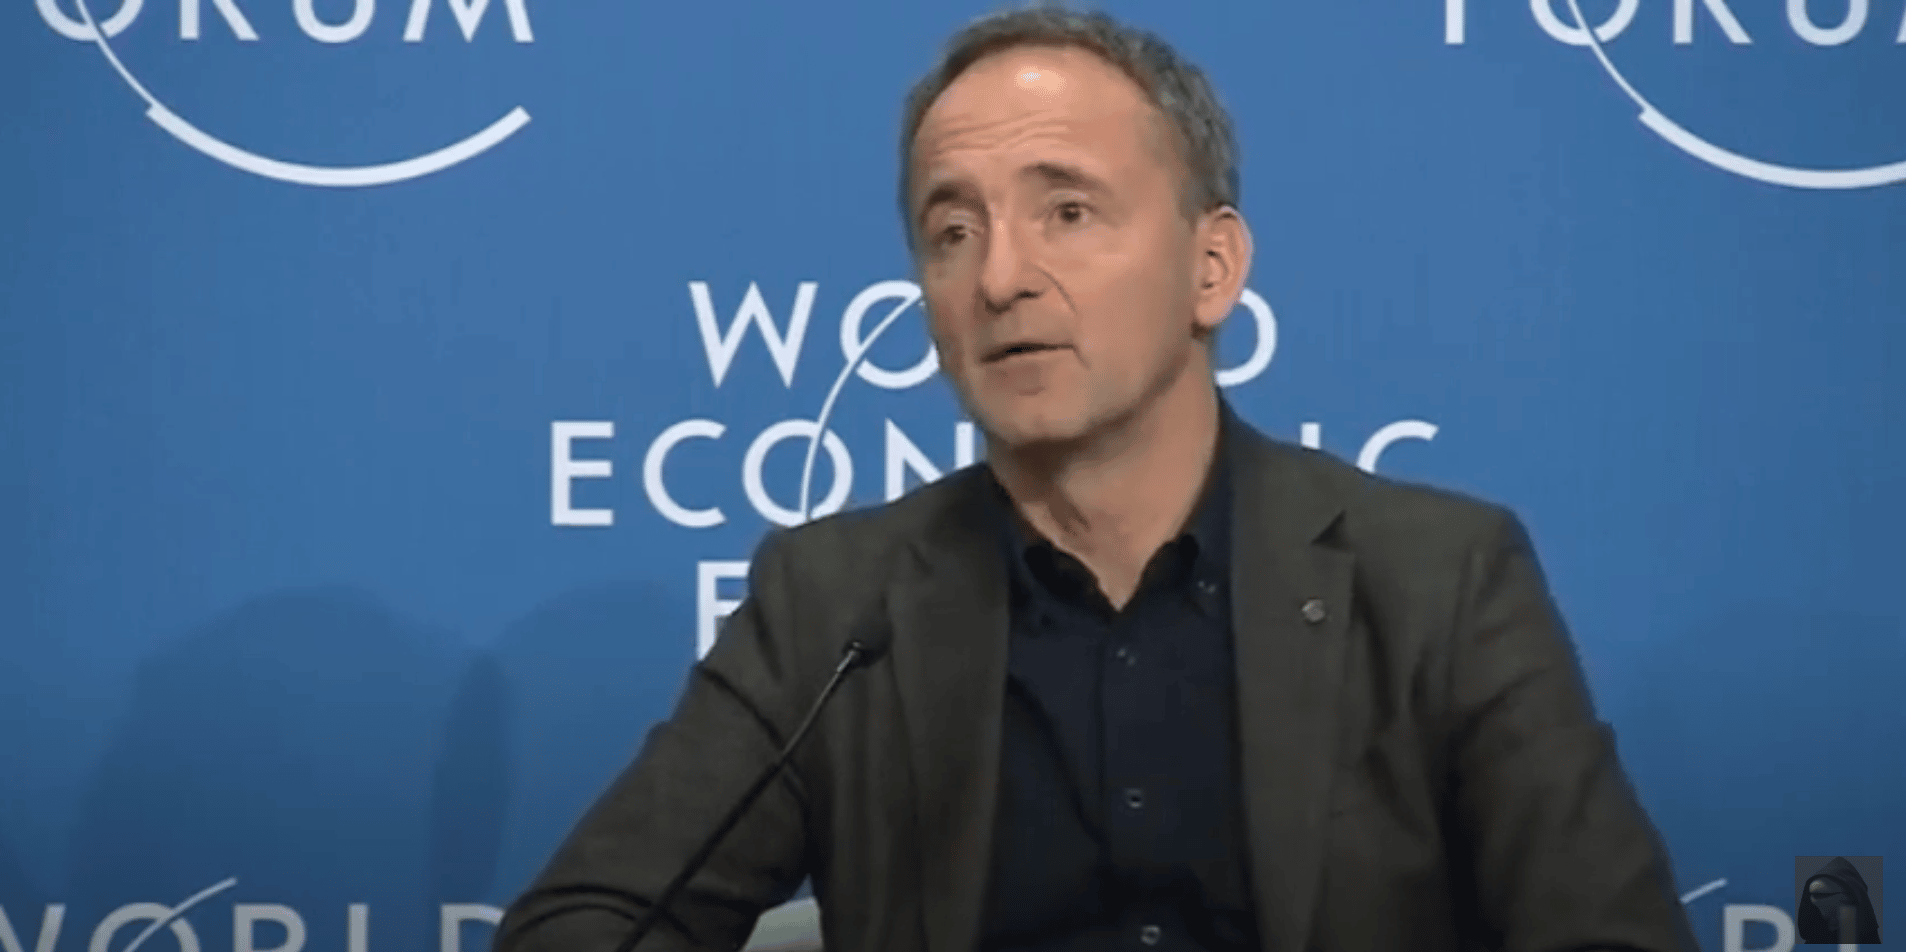 (WATCH) Davos speaker calls for one billion people to ‘stop eating meat’ for ‘innovation’ and the environment